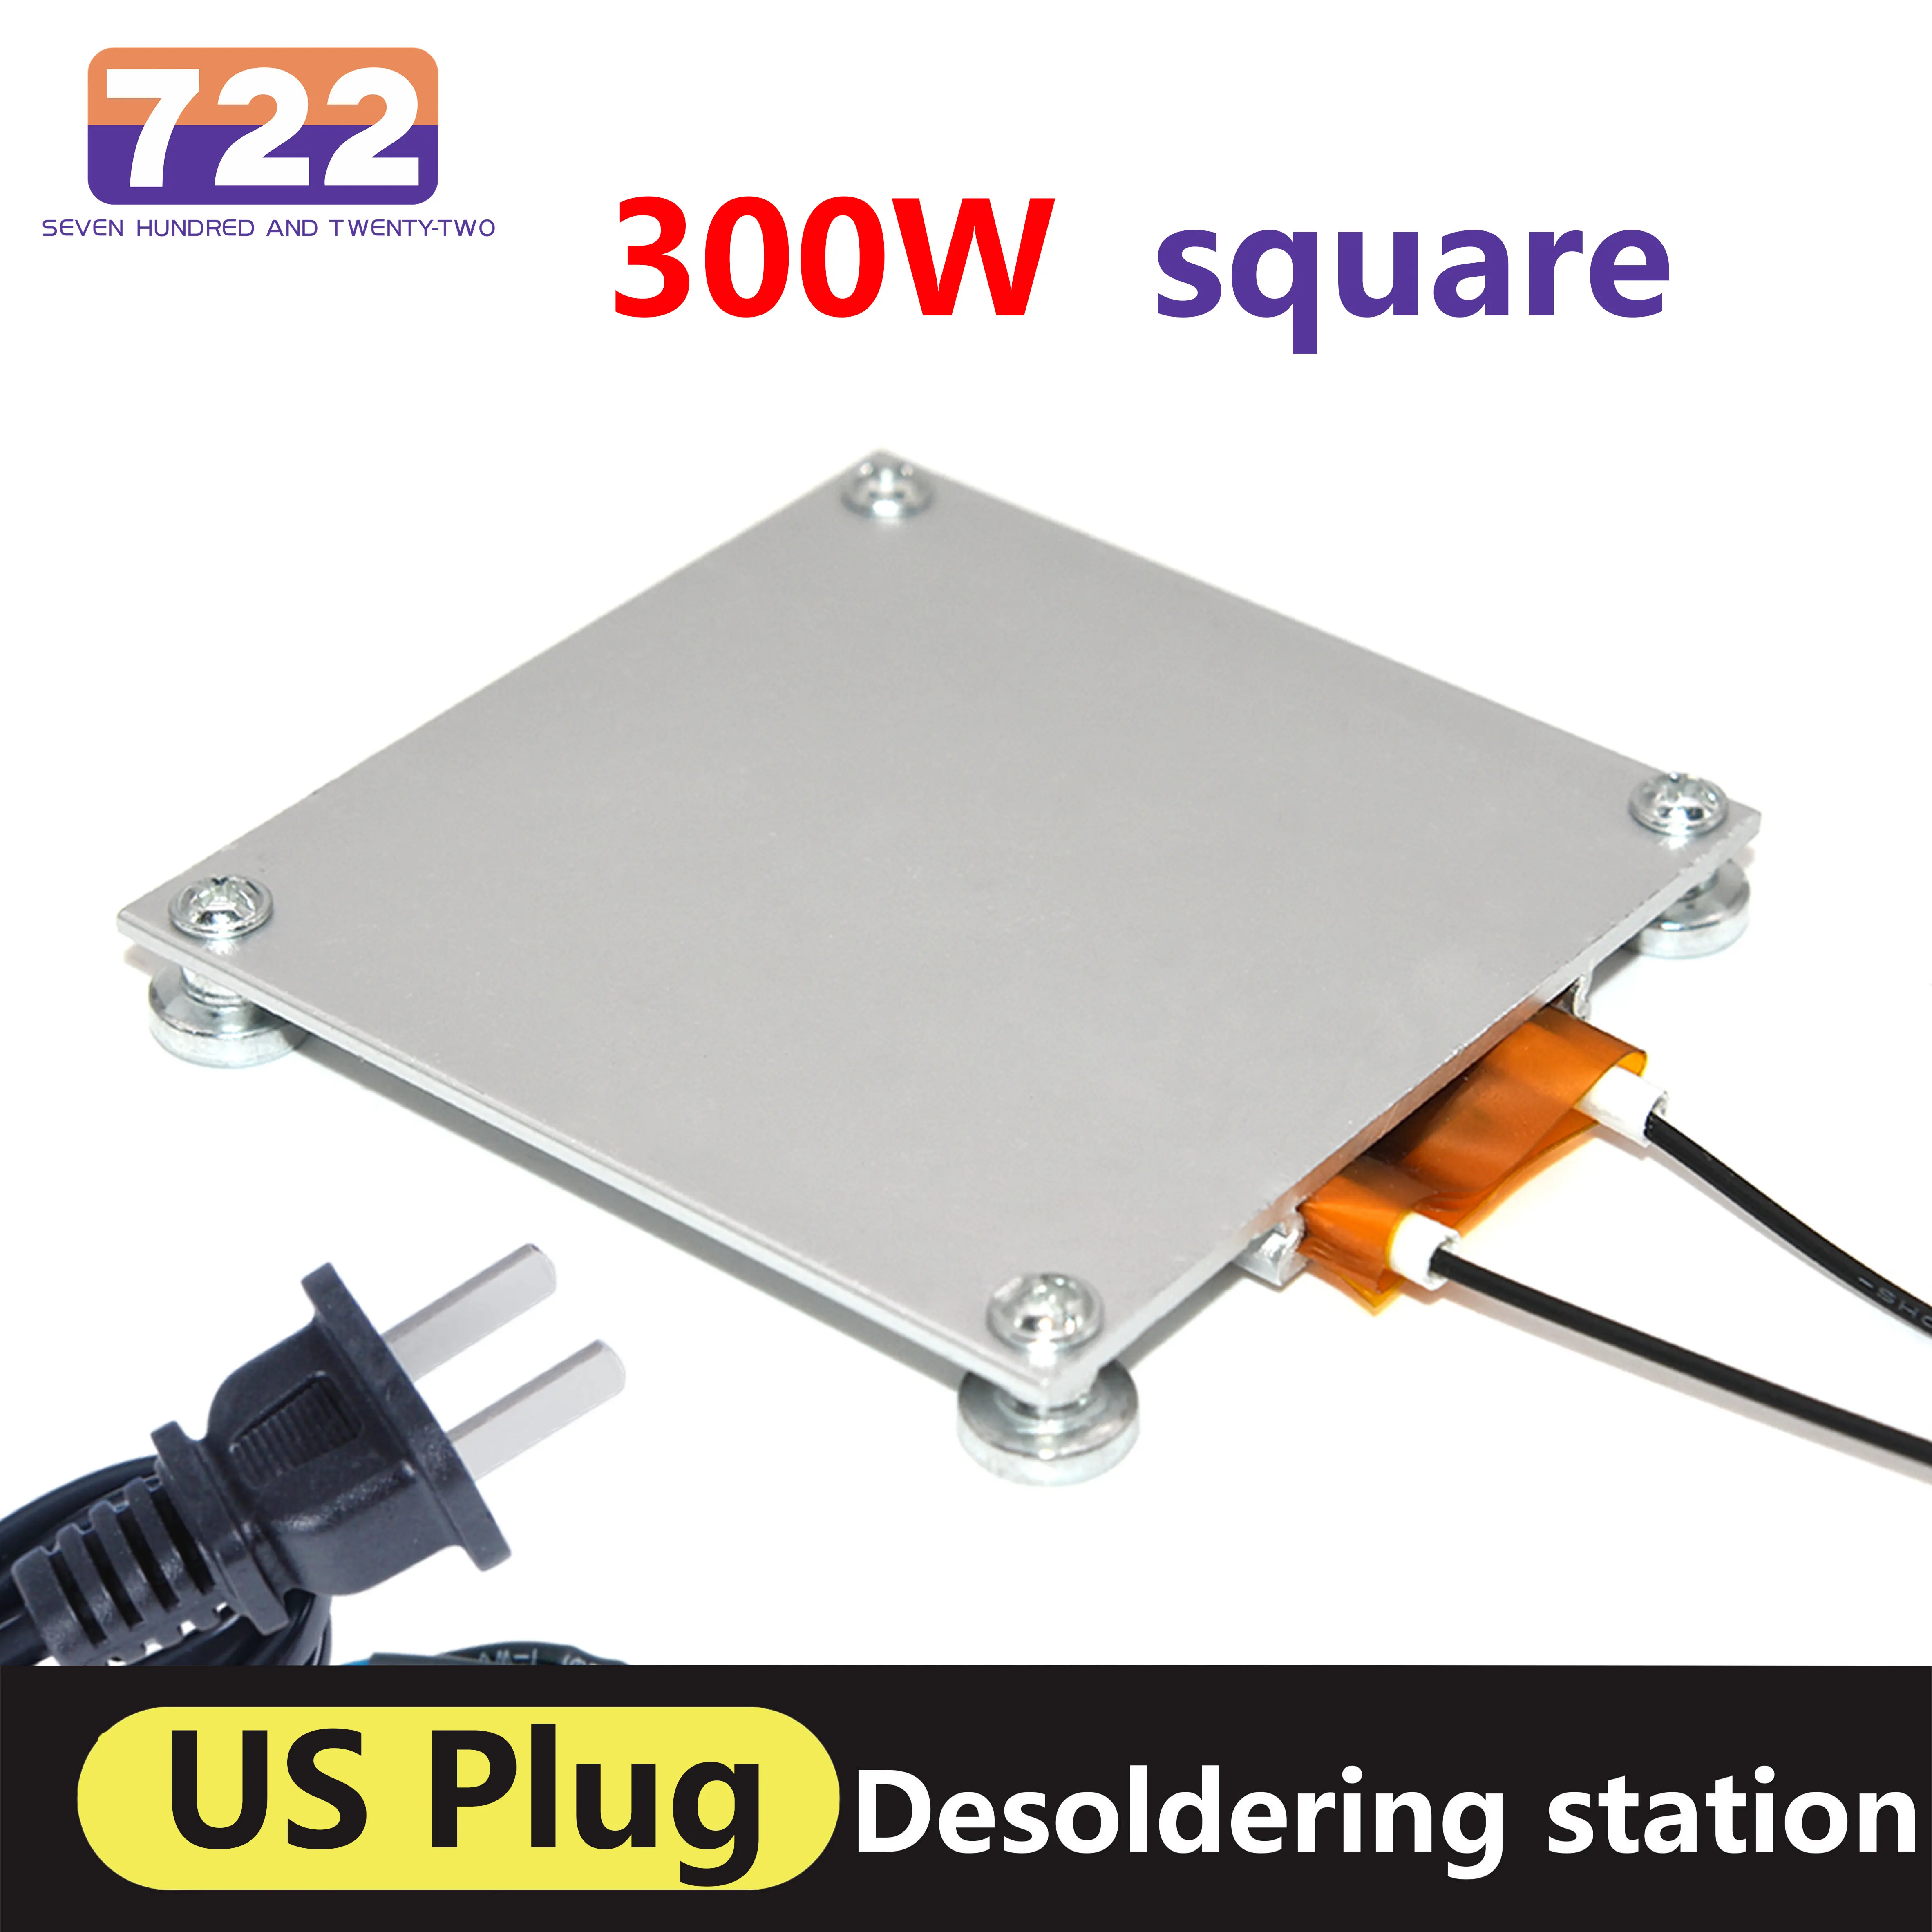 HD 722 70*70mm Rapid heating LED Lamp Remover Fast Heating Welding Solder Station Aluminum Heating Plate 260 Degree 300W US Plug hd 600w 300w heating soldering 220v 260 degree chip aluminum desoldering bga led lamp station ptc split plate led remover